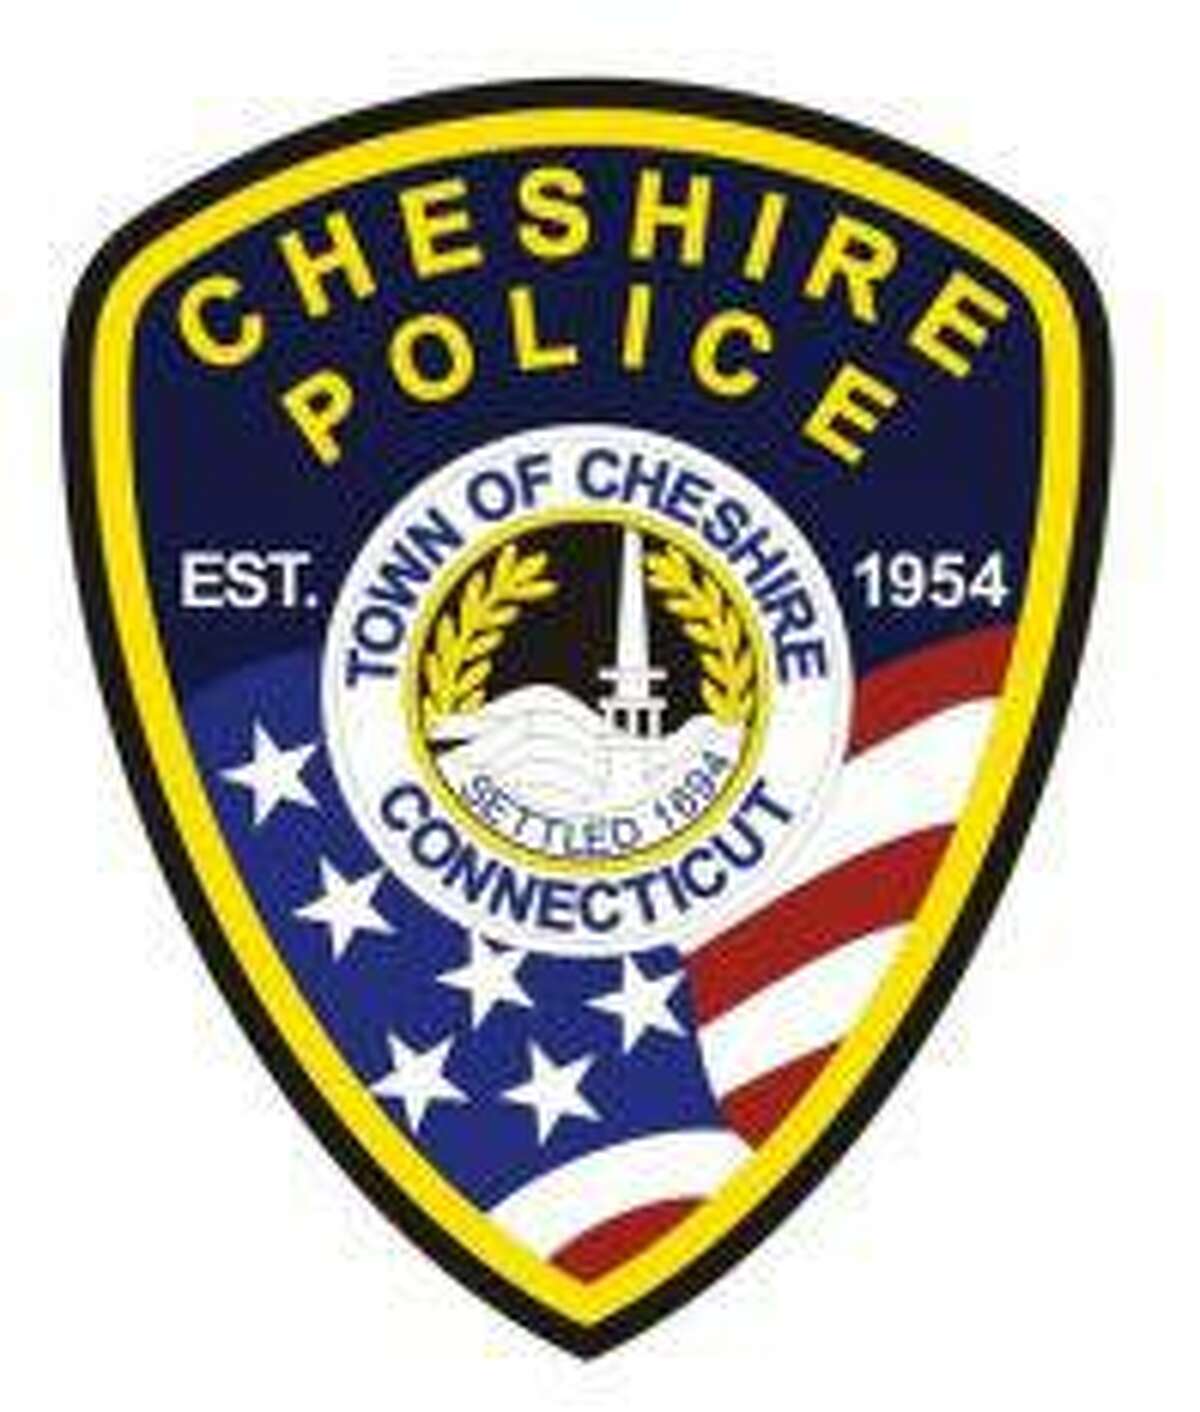 A person was killed Sunday morning in a crash near Diamond Hill Road in Cheshire, according to police.